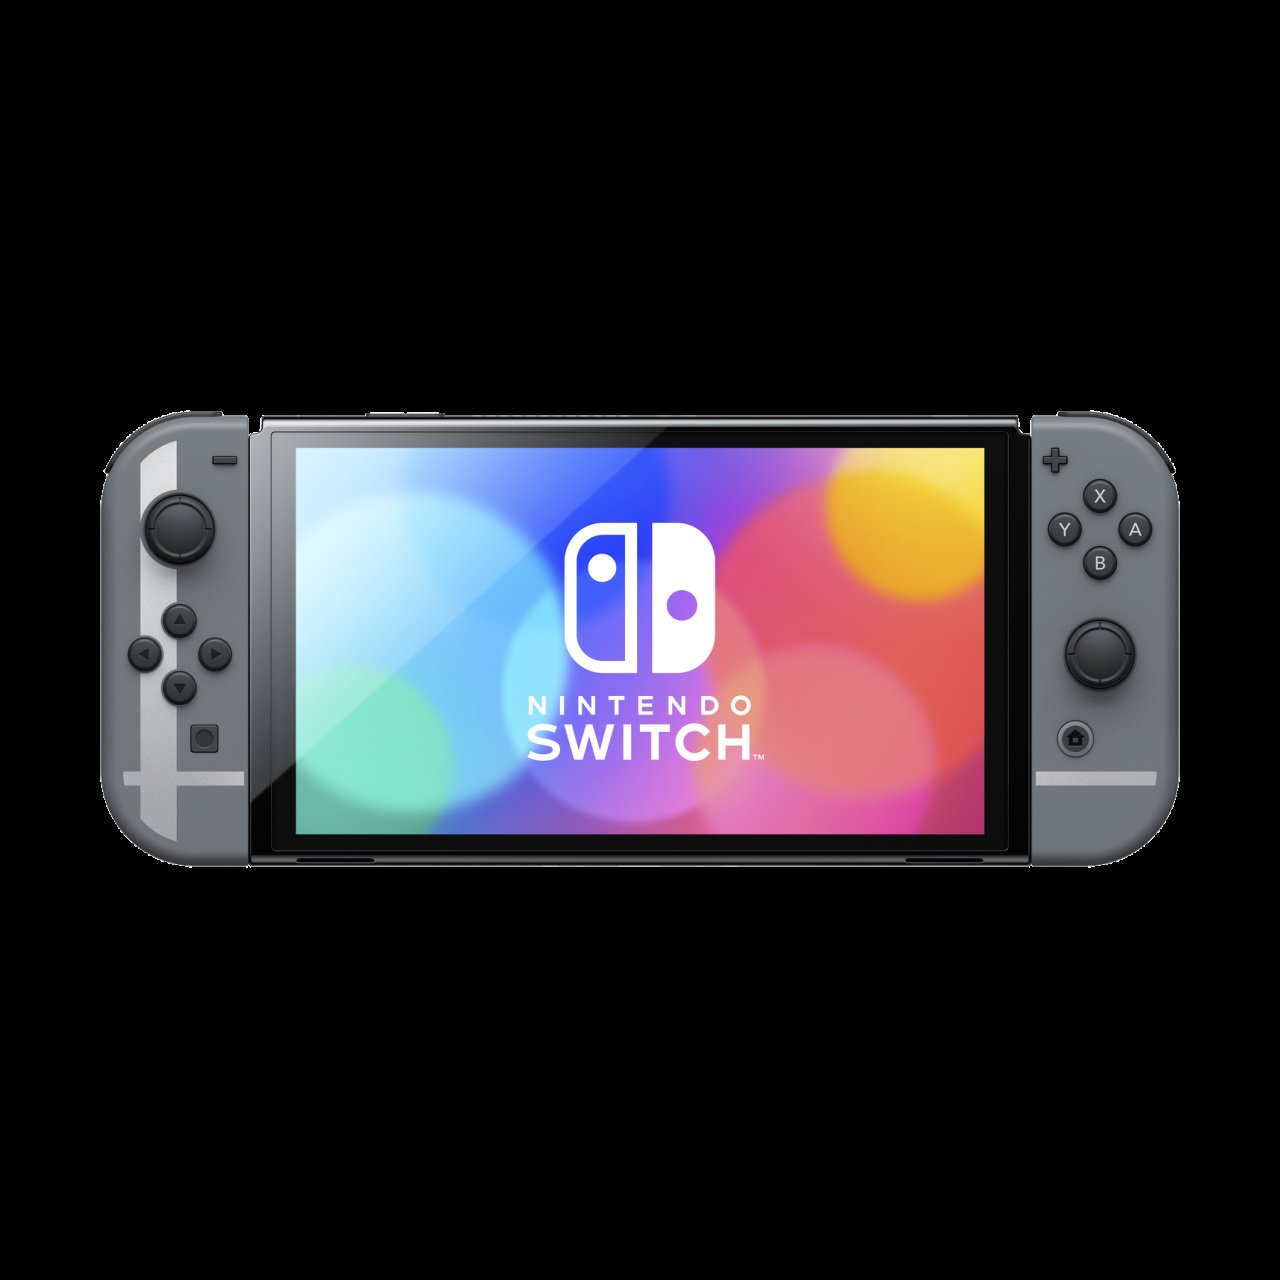 Nintendo offers Super Smash Bros. Ultimate and Nintendo Switch – OLED Model  bundle for Black Friday and announces other holiday deals - News - Nintendo  Official Site